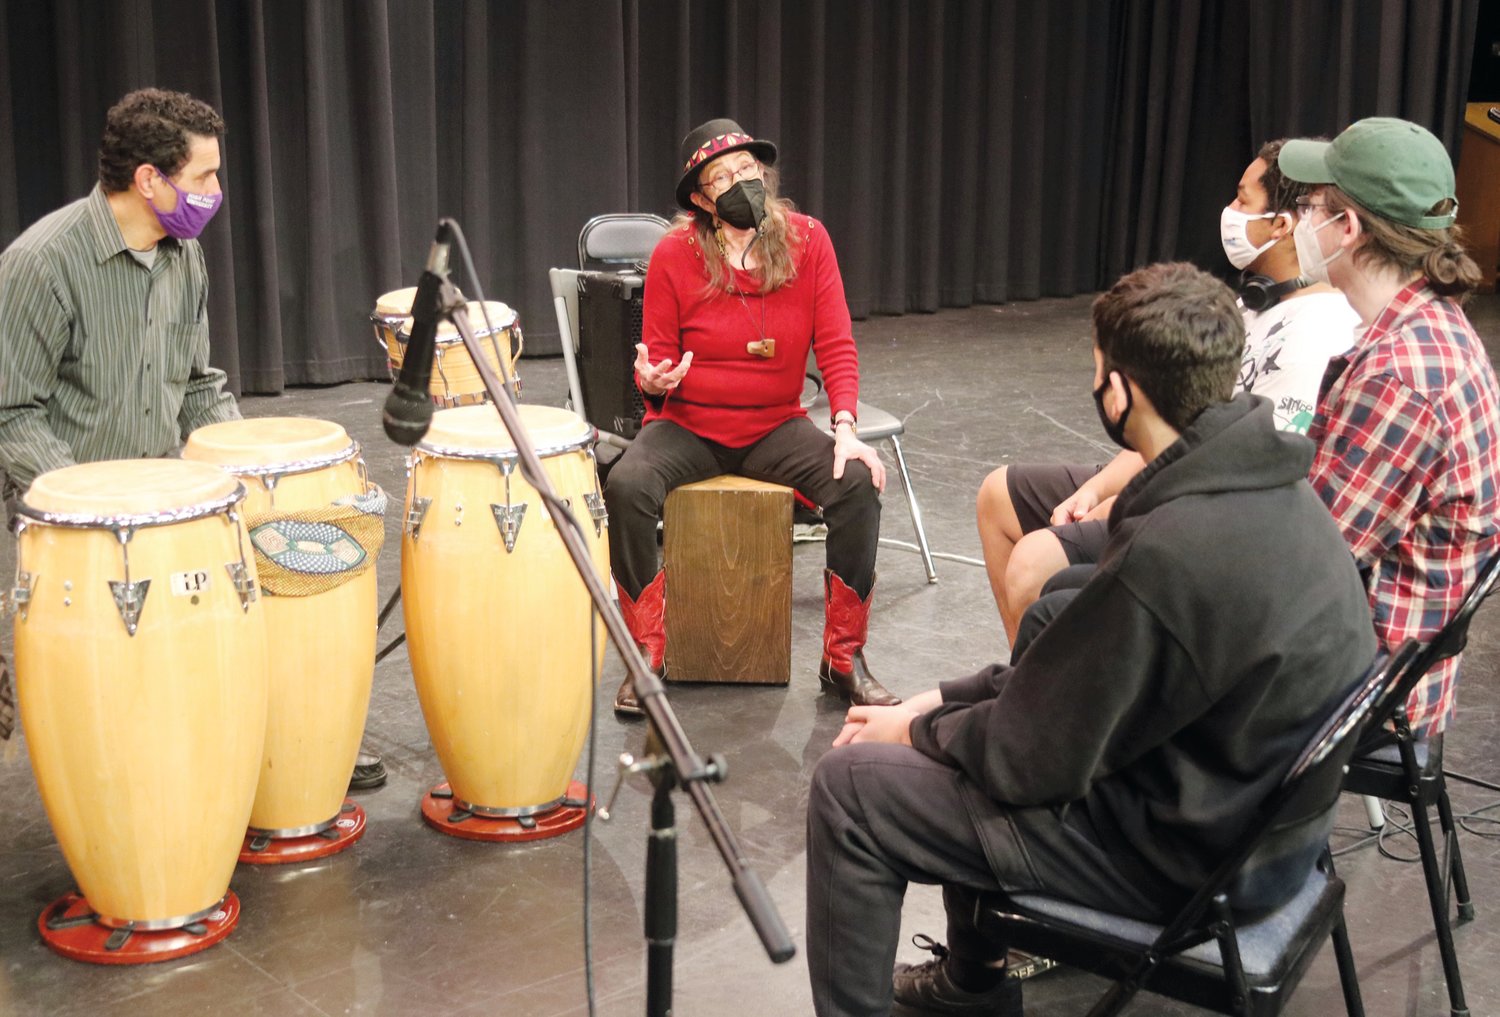 Drummer Ramon Ortiz (left) and percussionist Beverly Botsford of La Fiesta Latin Jazz Sextet teach student percussionists about playing Latin jazz during an afternoon workshop on Jan. 28 in Jordan-Matthews High School.